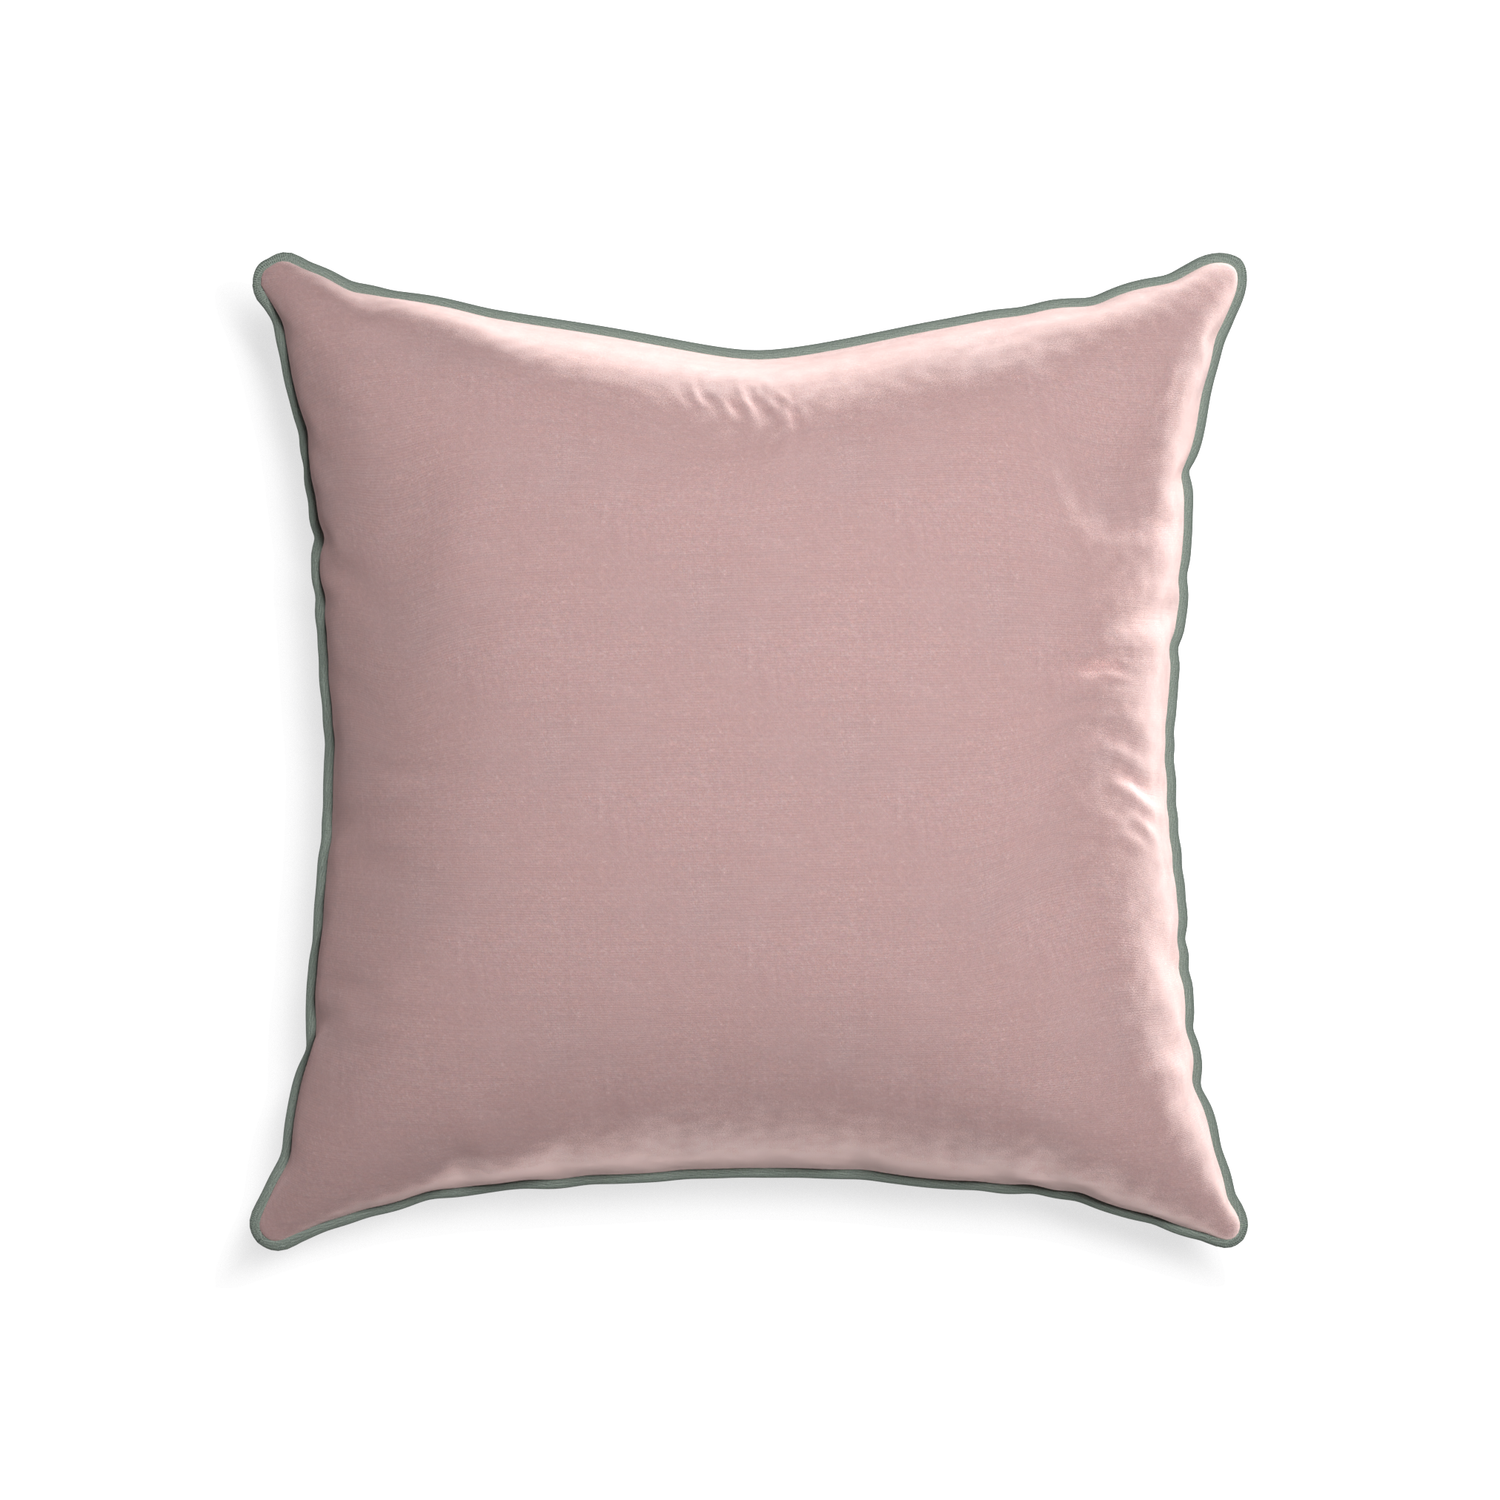 22-square mauve velvet custom mauvepillow with sage piping on white background